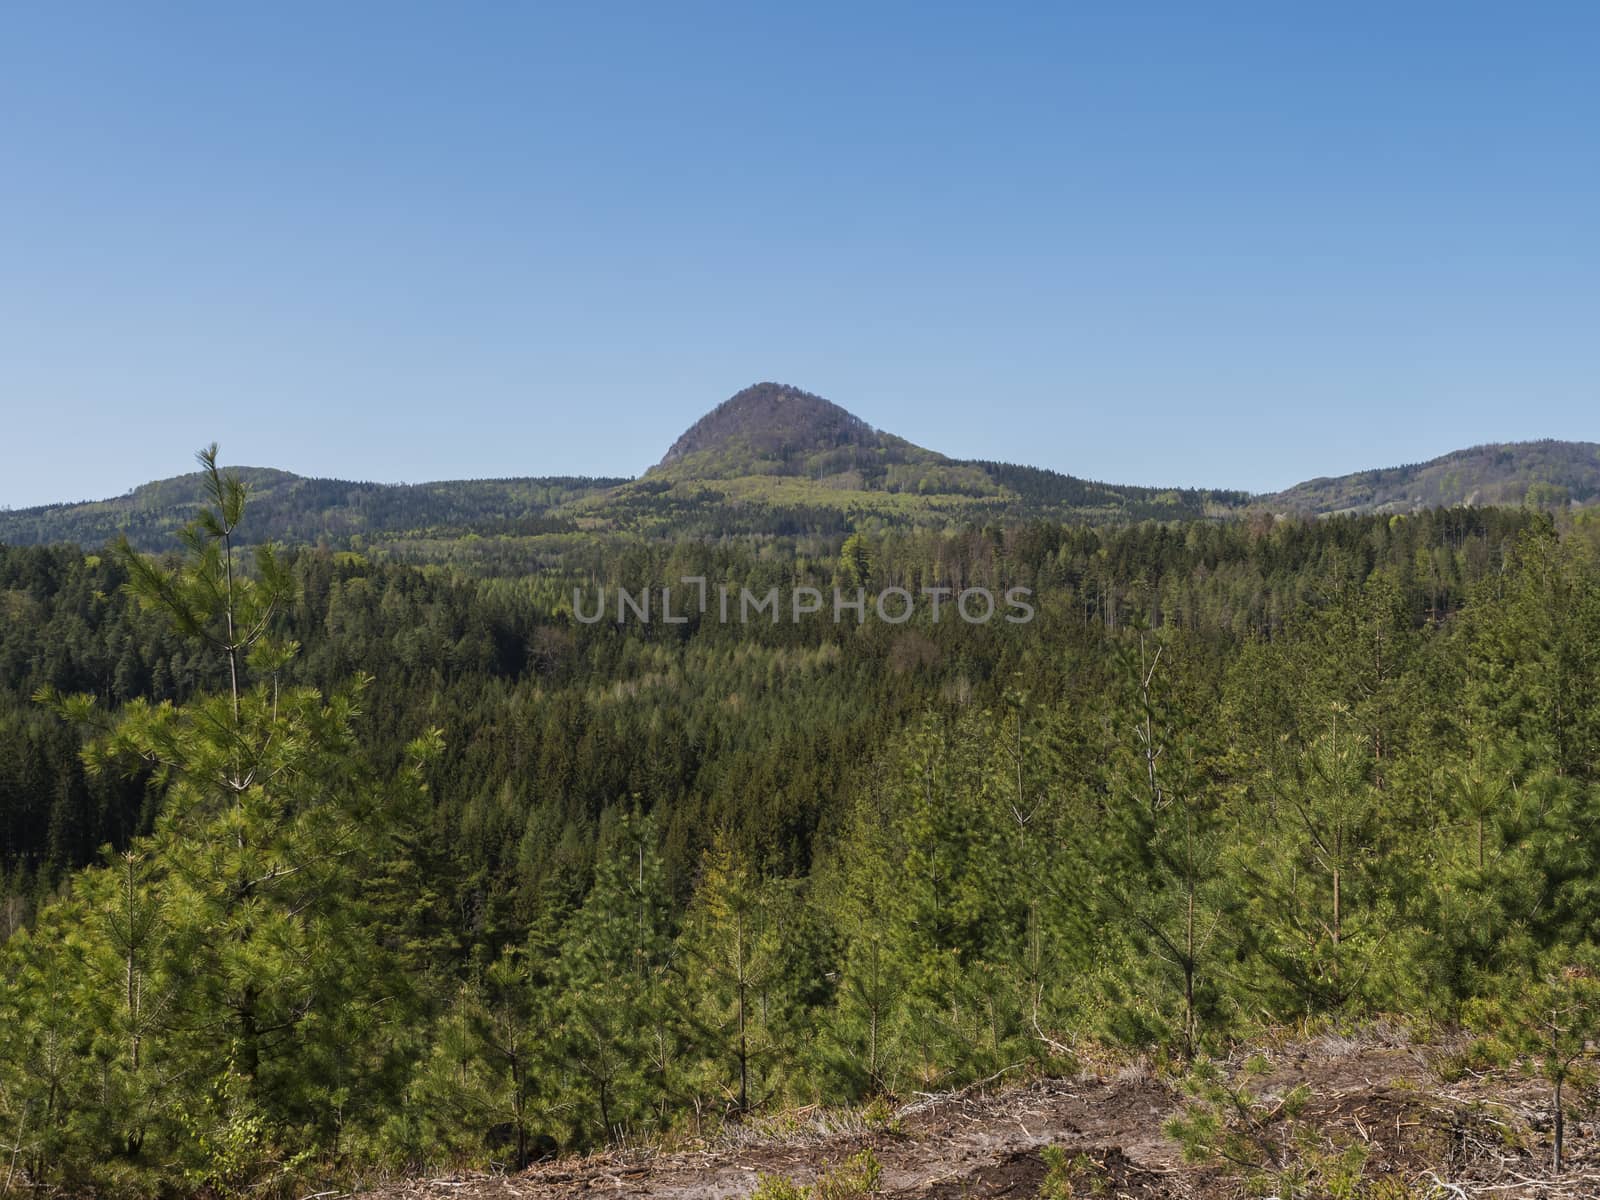 Spring landscape in Lusatian Mountains with view point hill Klic or Kleis, fresh deciduous and spruce tree forest. Blue sky background, horizontal, copy space.